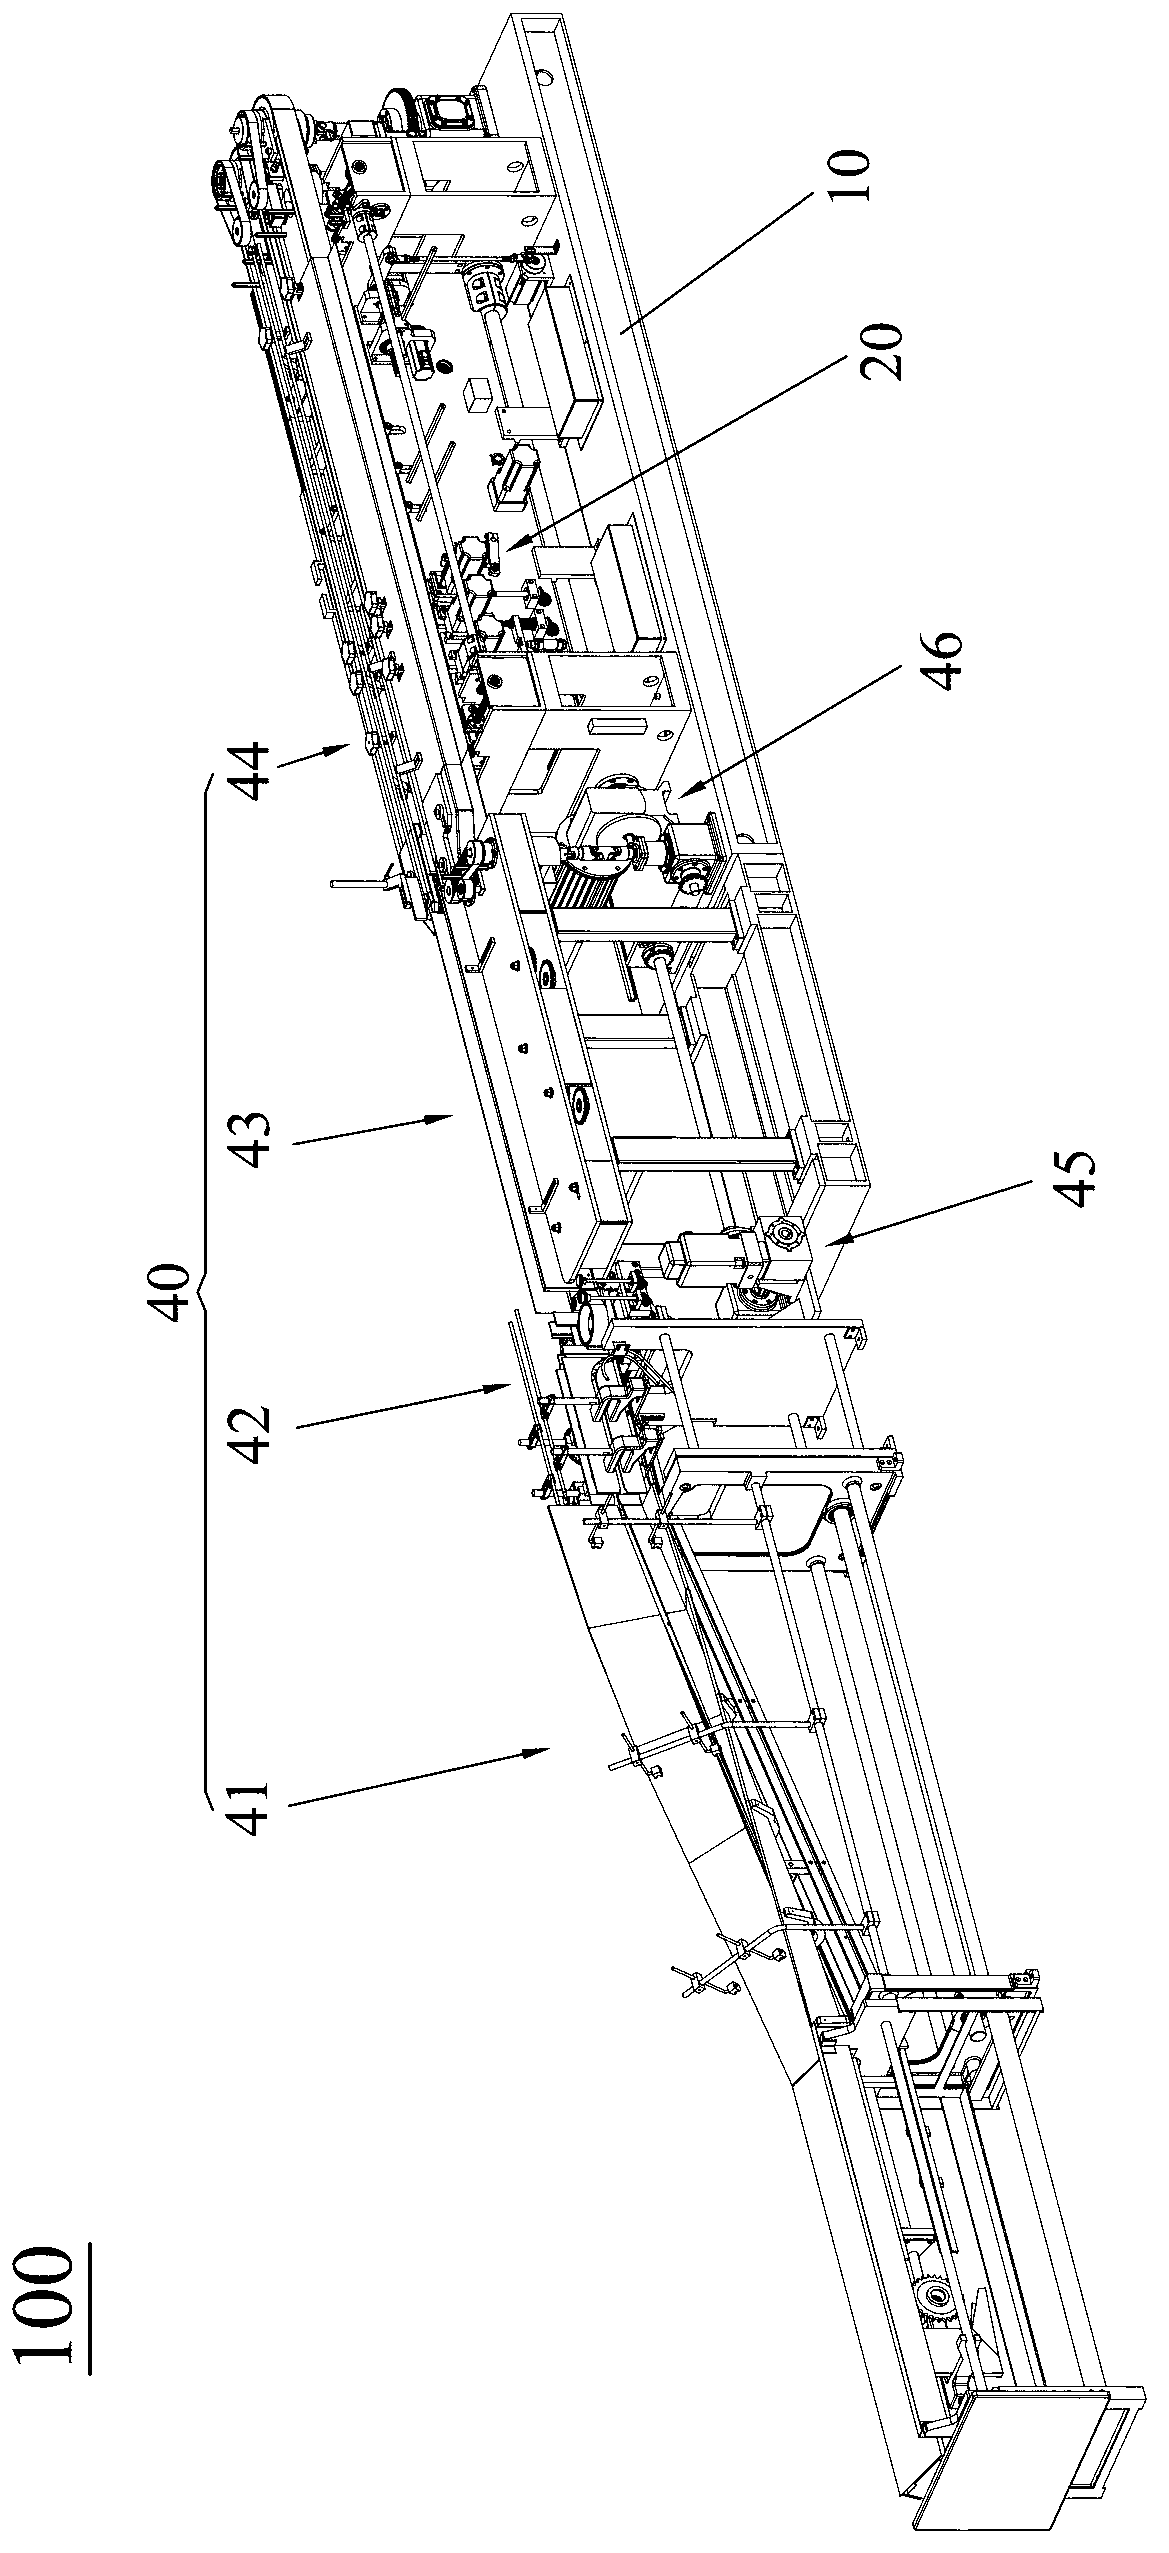 Automatic spine covering machine